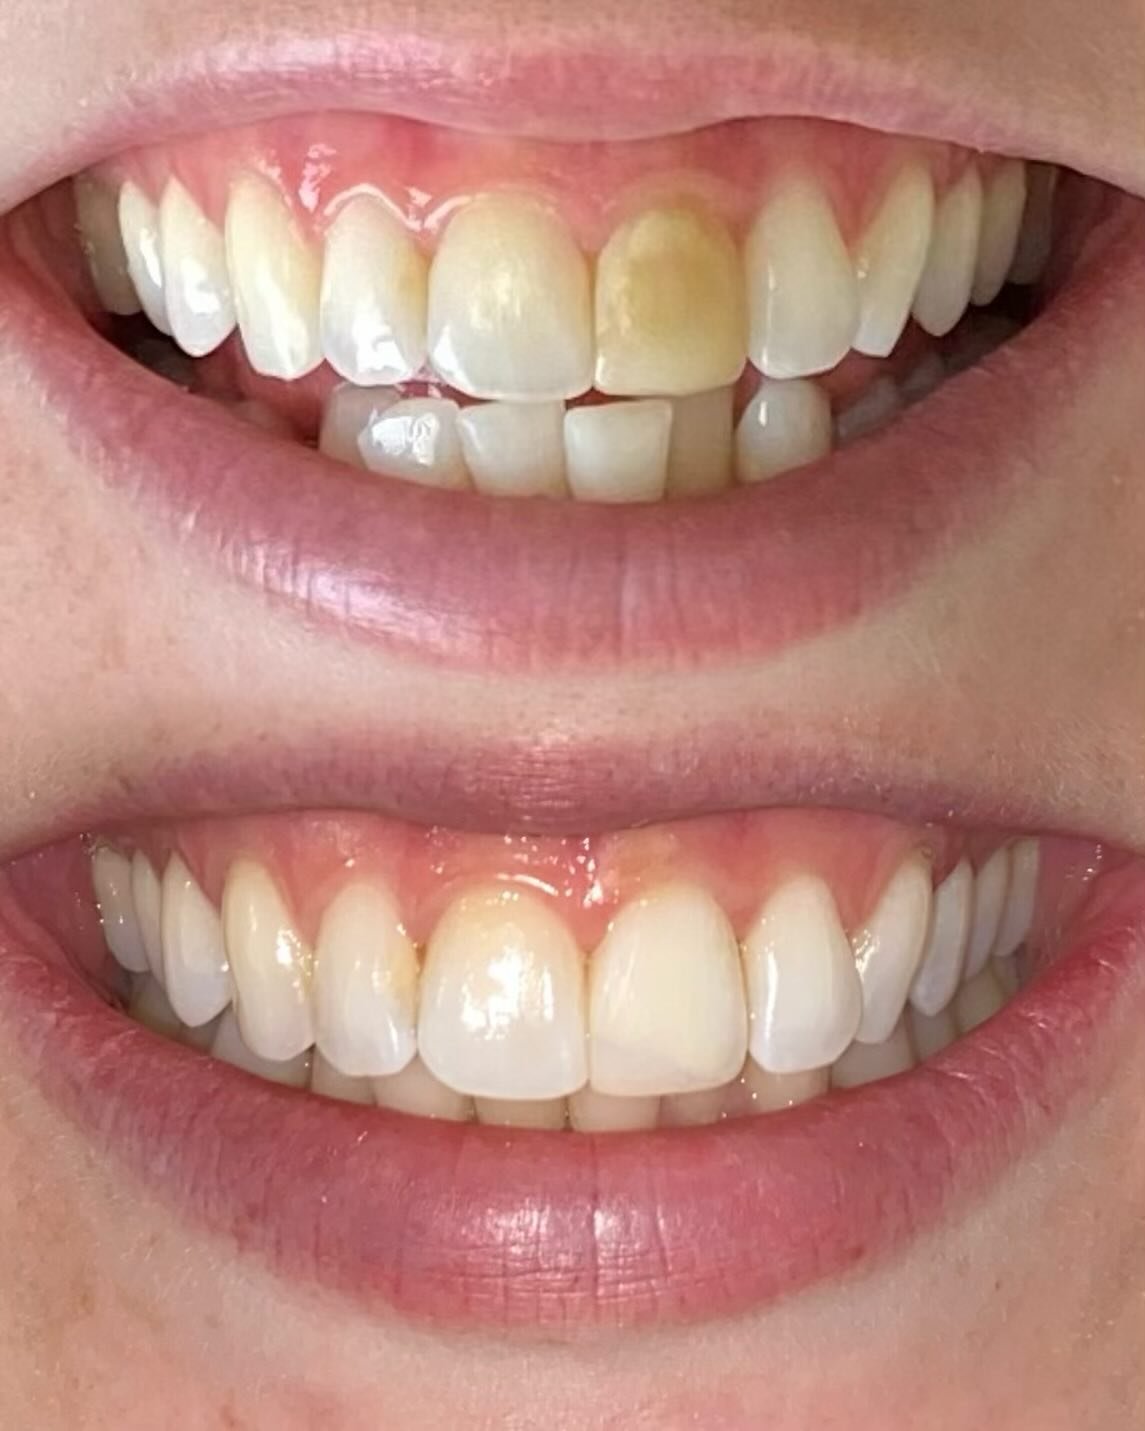 Patient presents with discolored front tooth due to historical trauma. The tooth is asymptomatic and the radiograph revealed calcific metamorphosis (nerve and blood vessels completely calcified) with a normal apex (no infections), and thus there was 